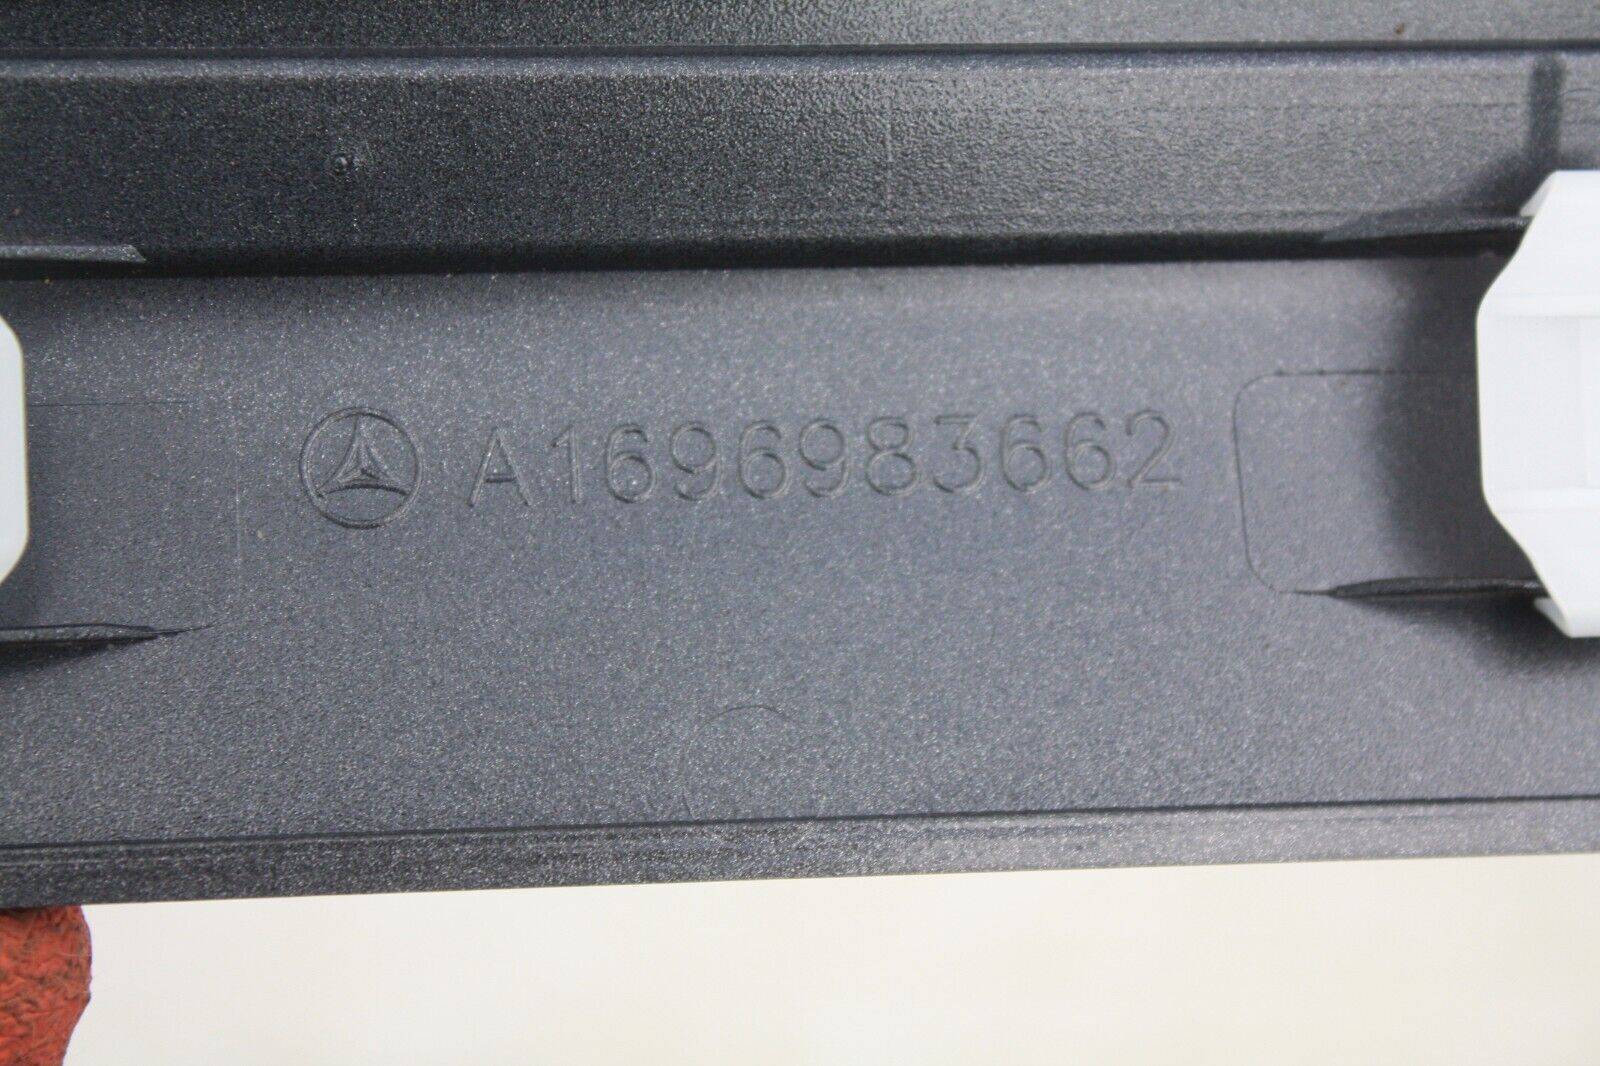 Mercedes-B-Class-W245-Front-Right-Door-Moulding-A1696983662-Genuine-175919996168-6